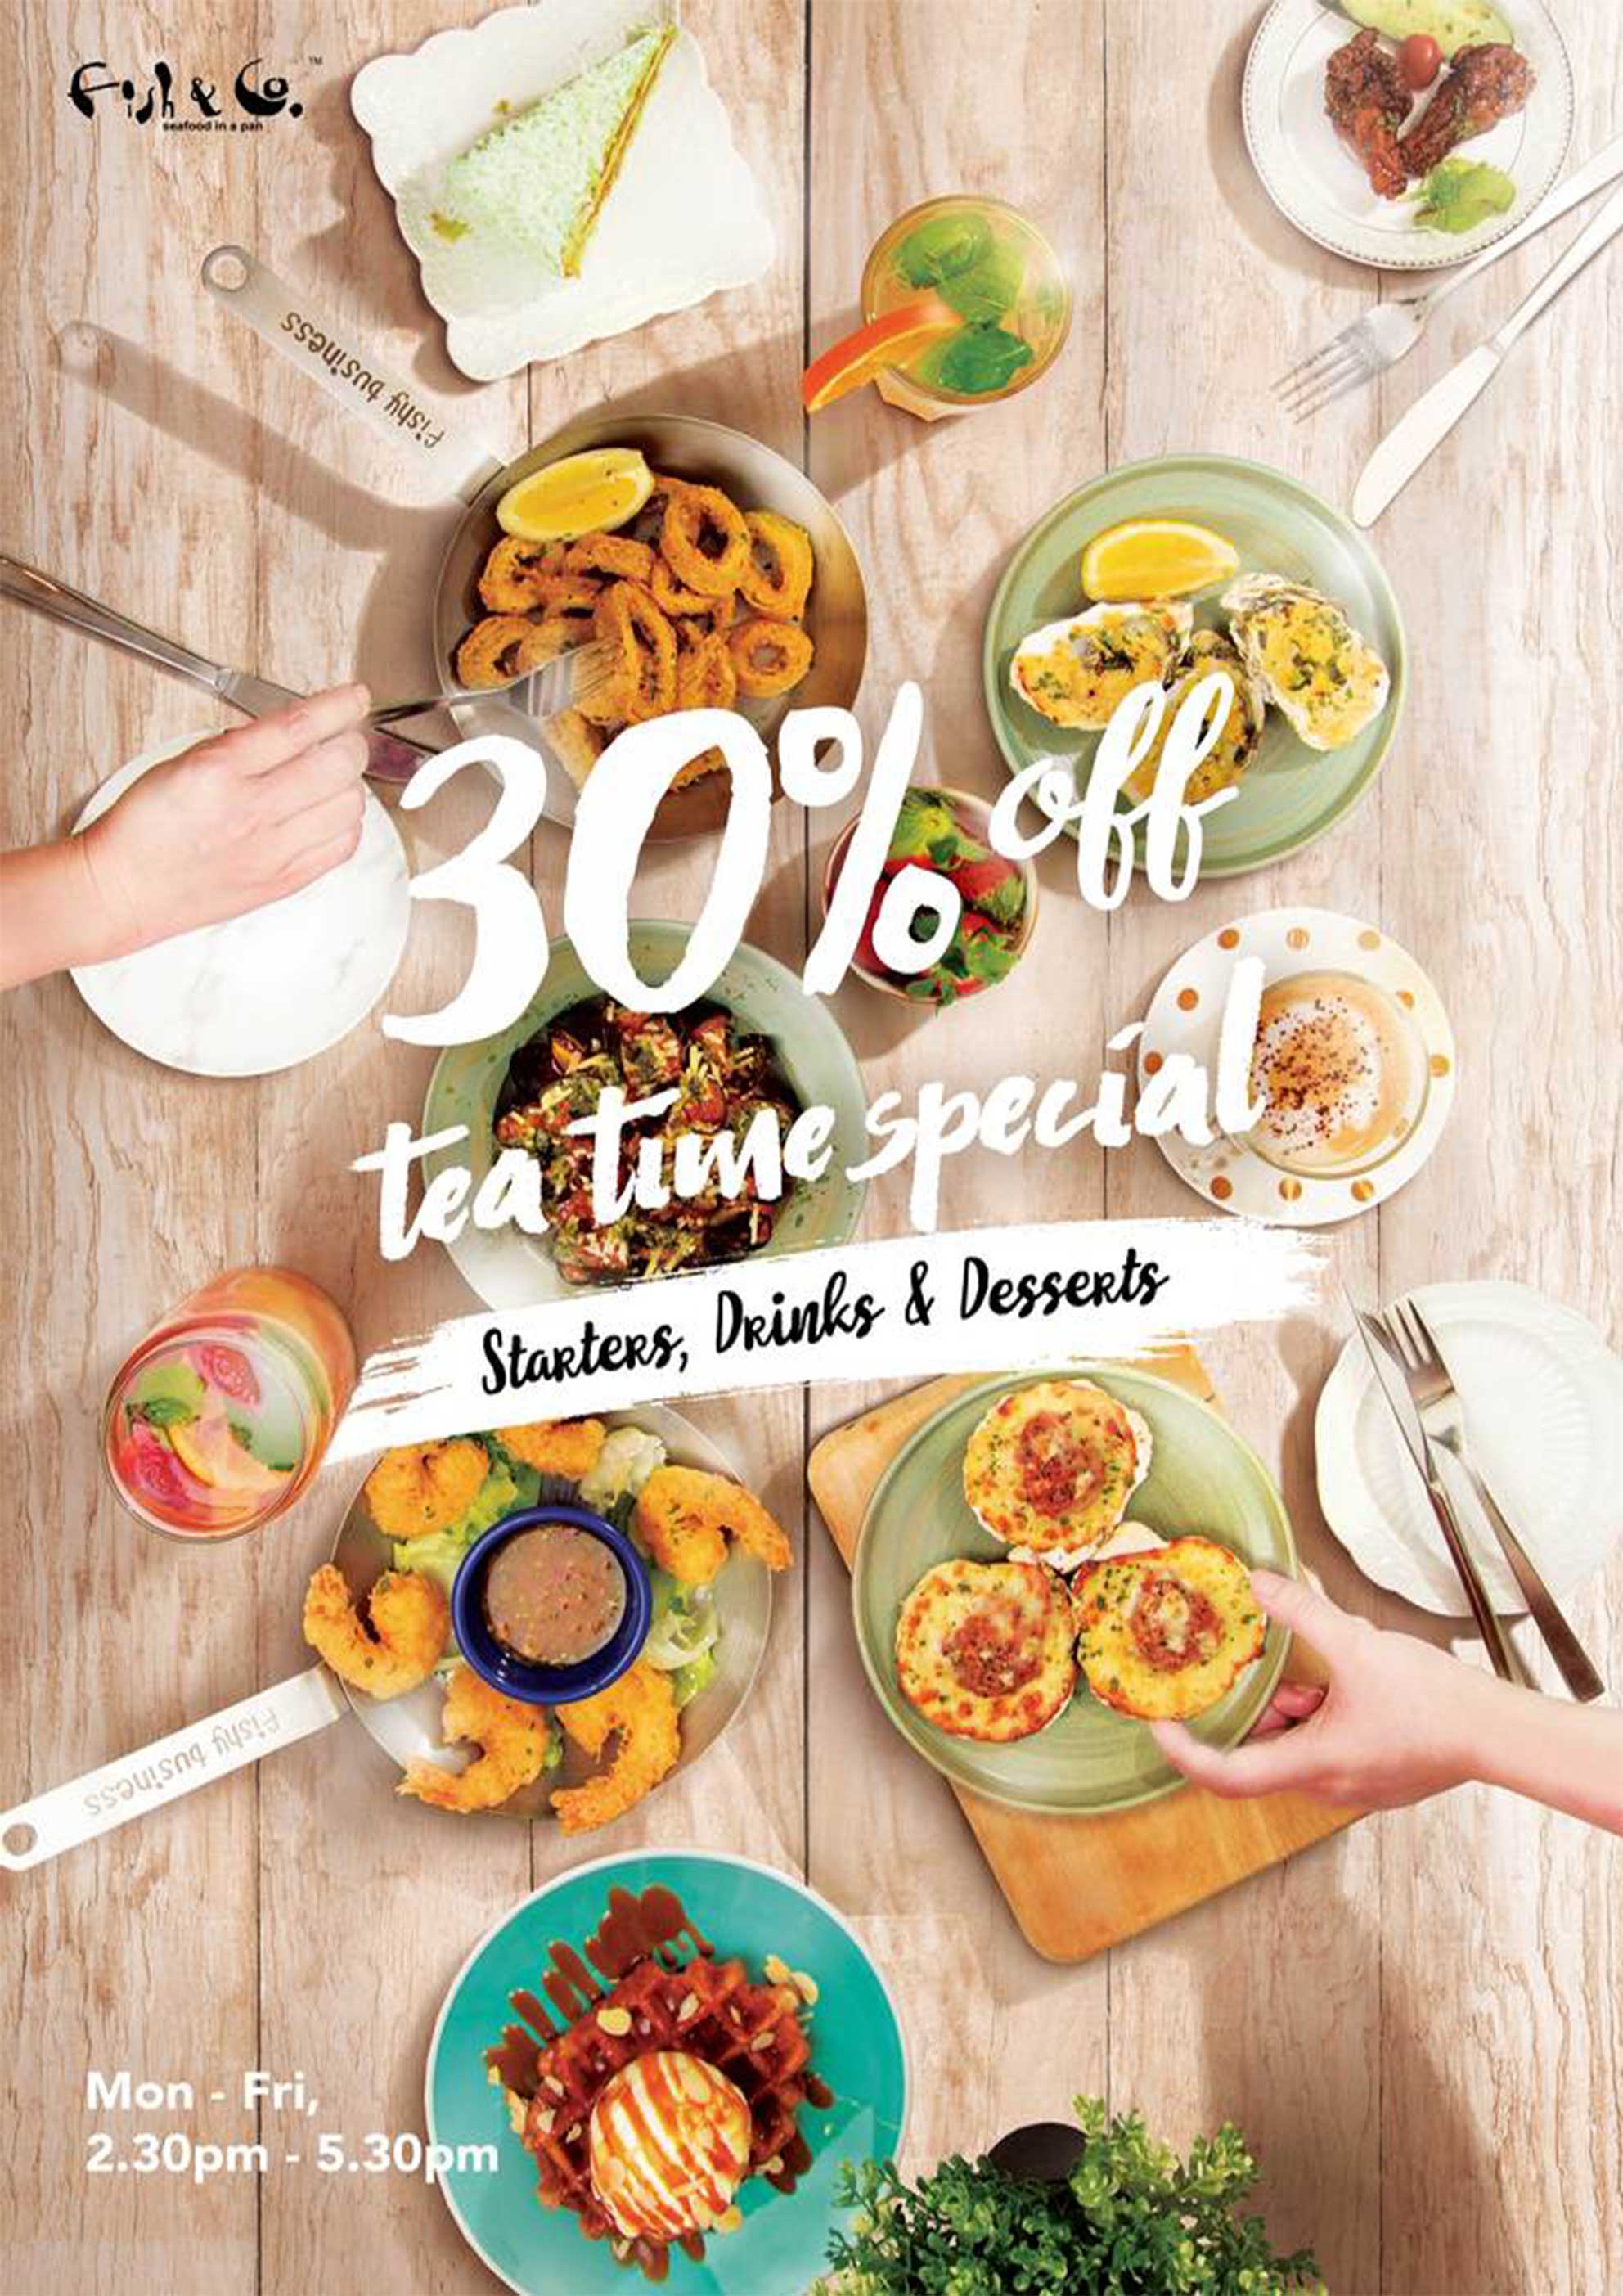 Promotion Tea time special